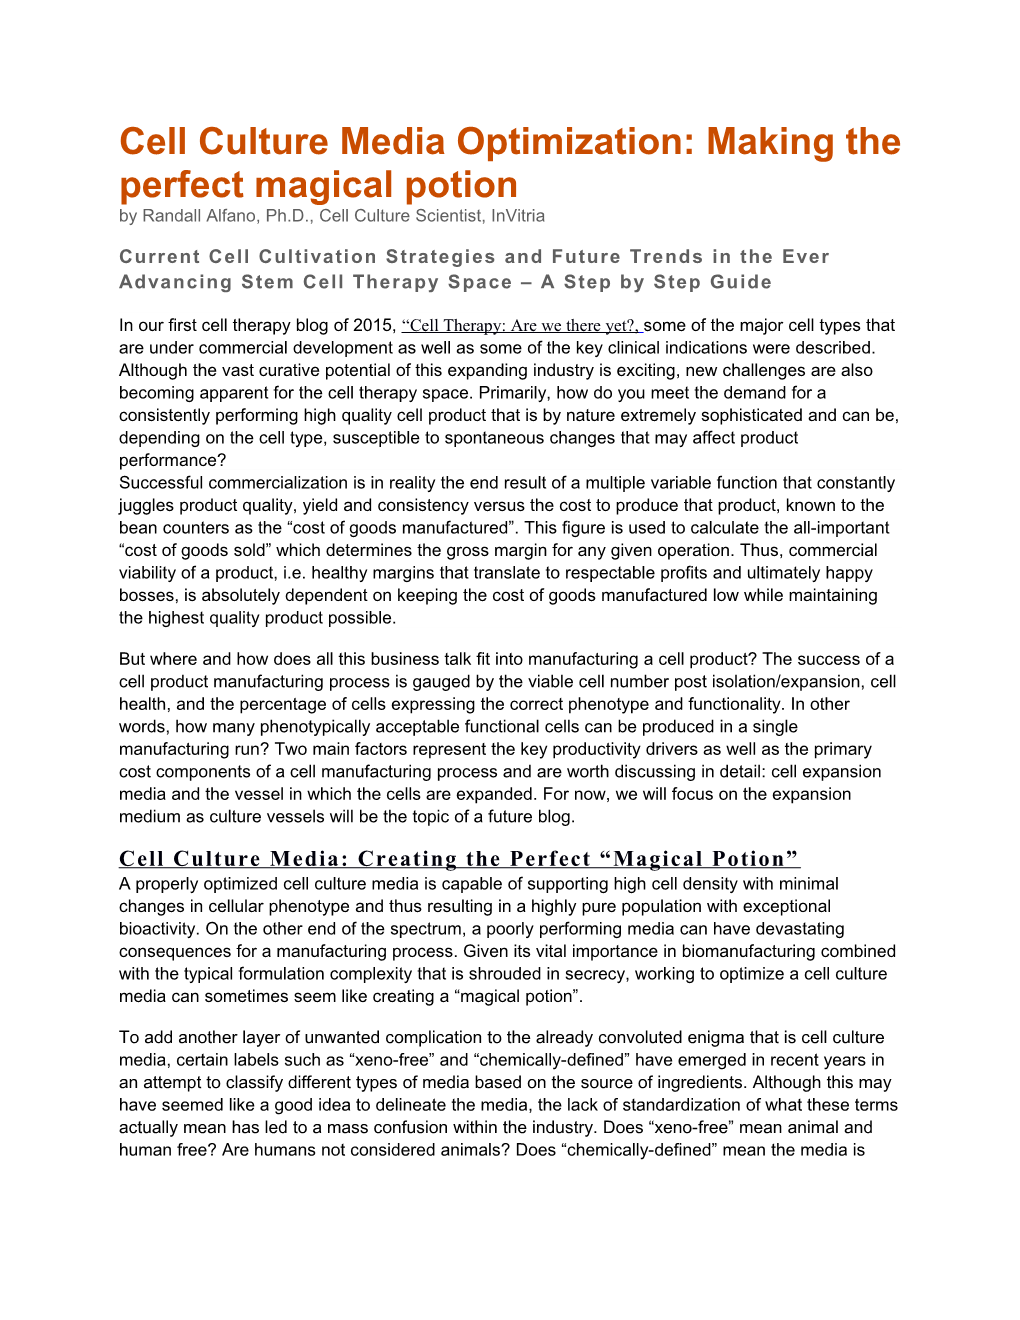 Cell Culture Media Optimization: Making the Perfect Magical Potion